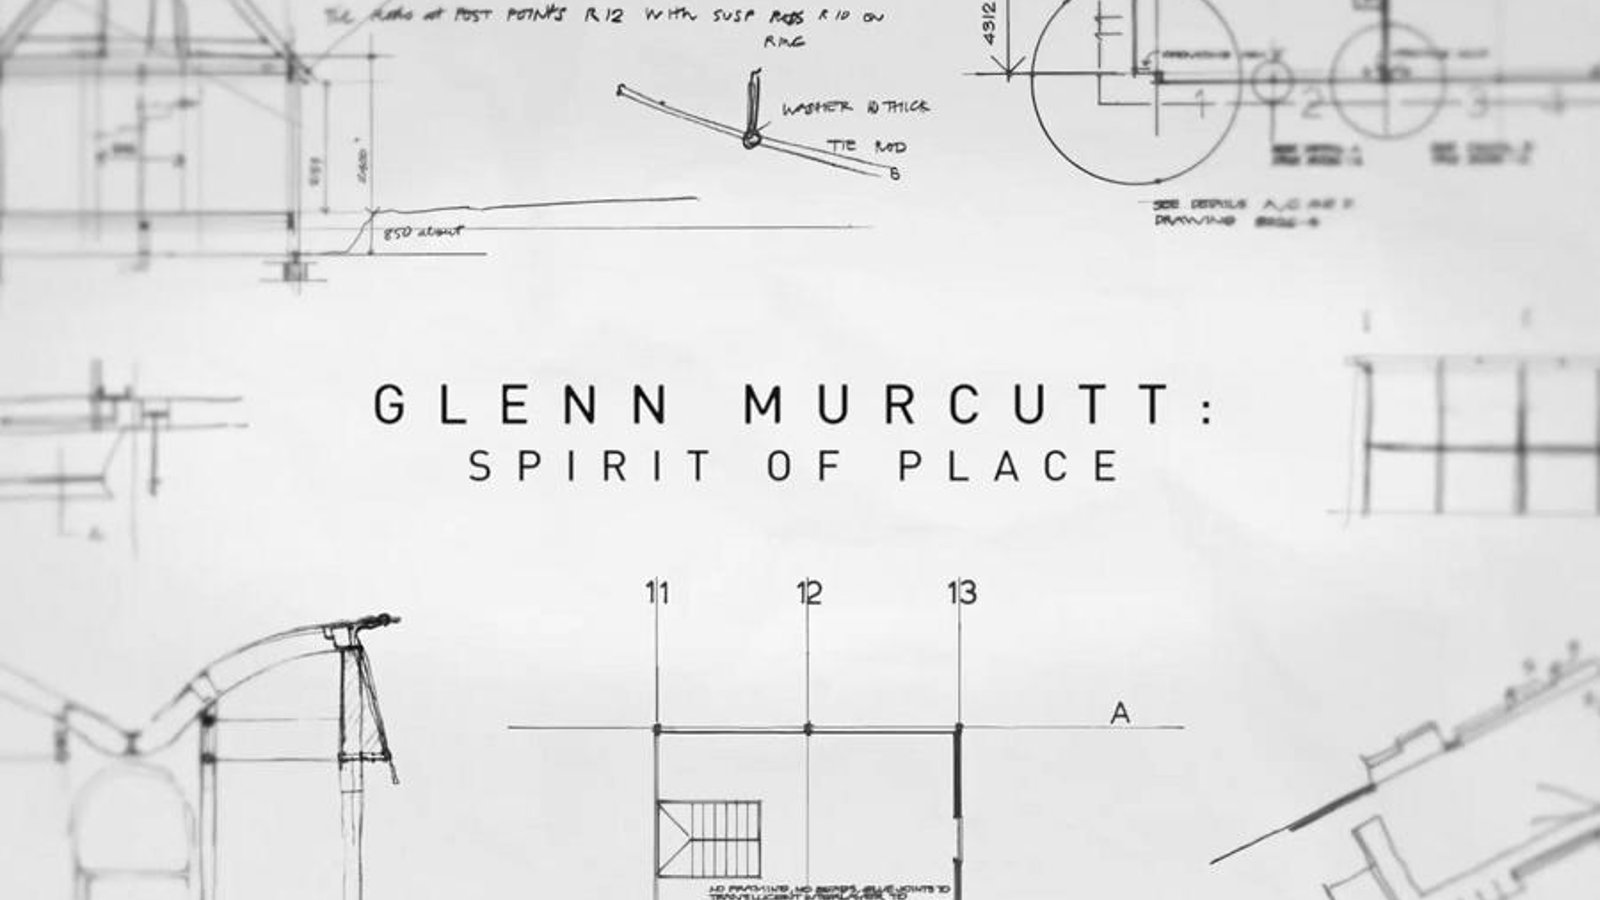 Glenn Murcutt: Spirit of Place - The Construction of a Mosque for an Islamic Community in Melbourne